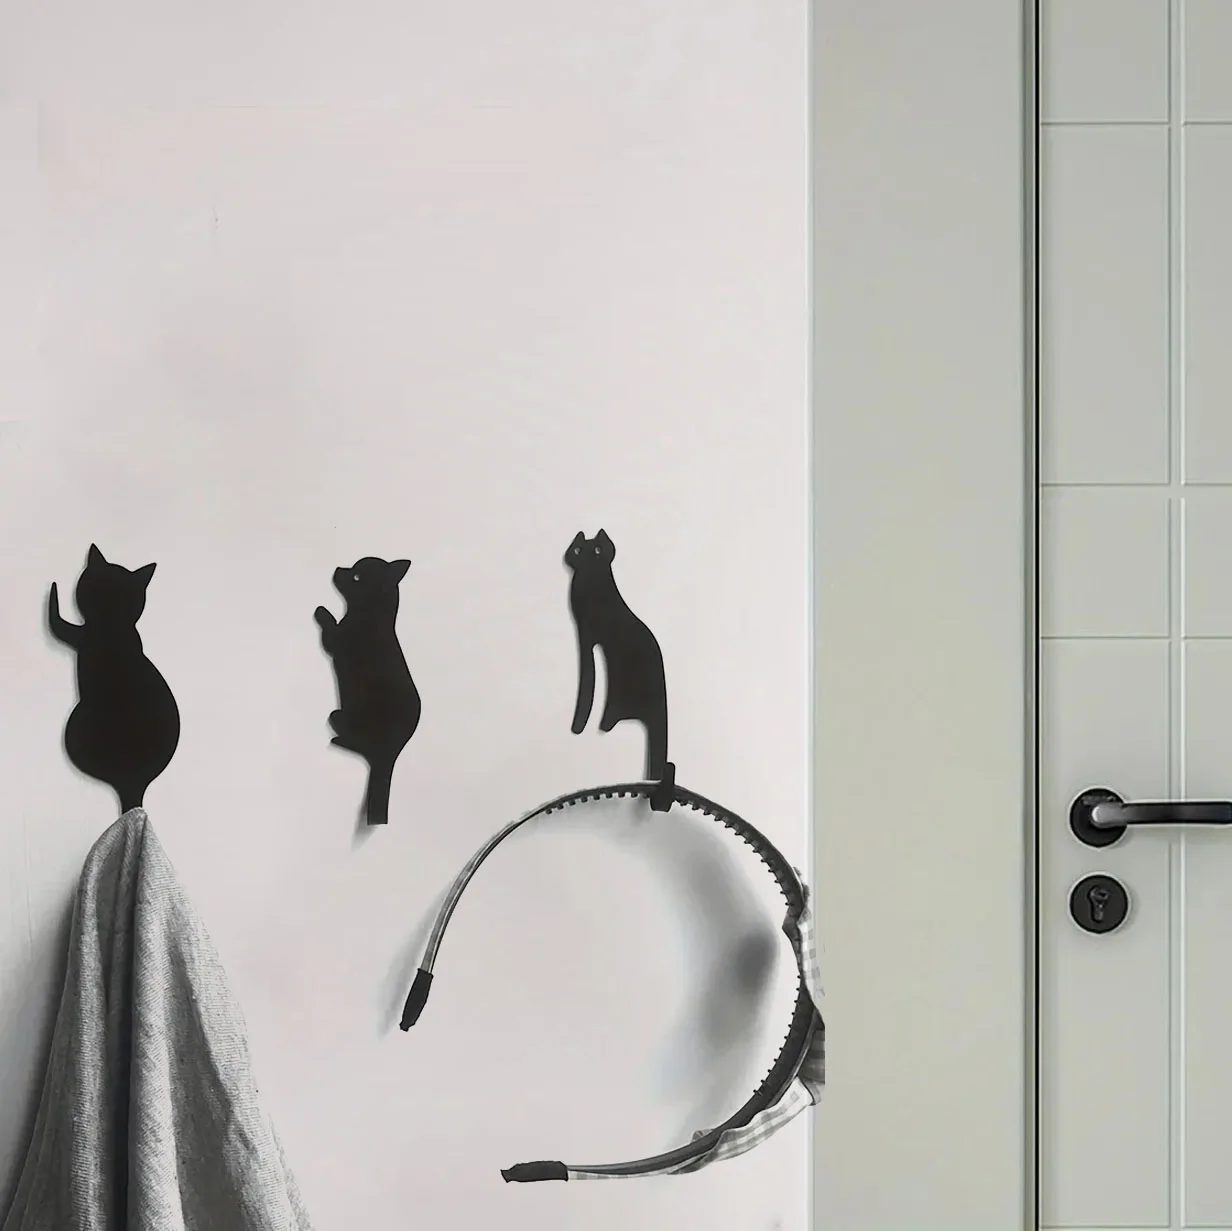 

Crafts 3pcs Cute Cat Design Metal Hook,Simple Robe & Towel Hook, Nail-free Punch-free Strong Adhesive Hook Wall decoration